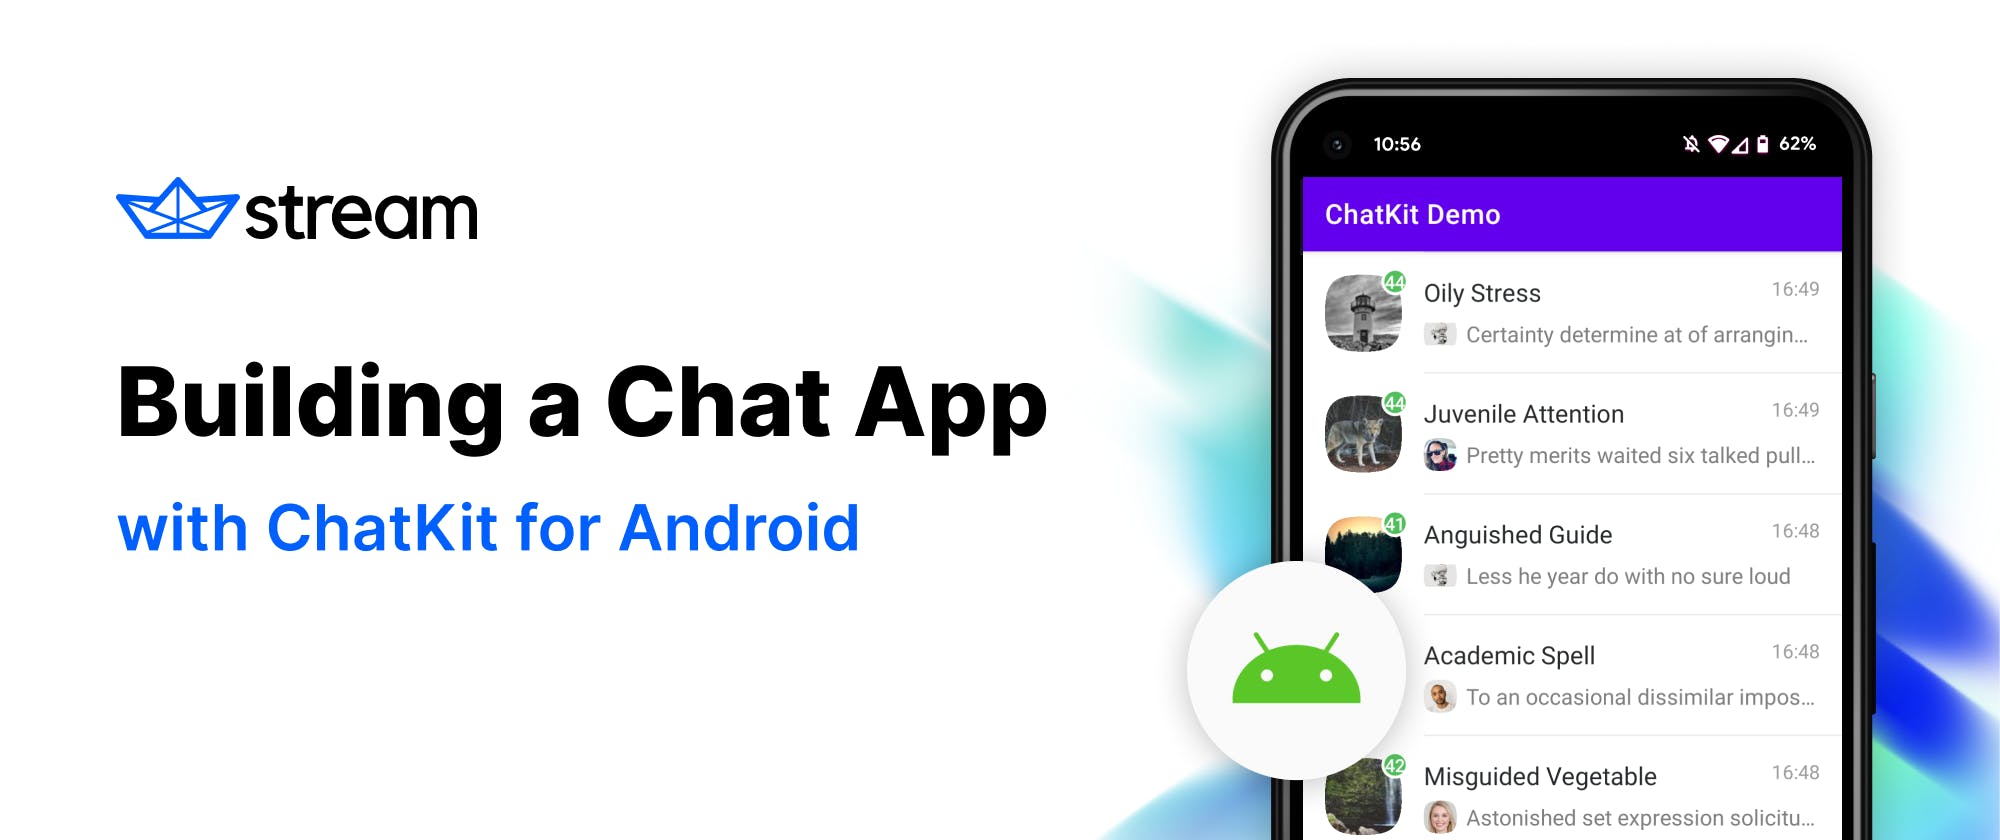 Building a Chat App for Android with ChatKit